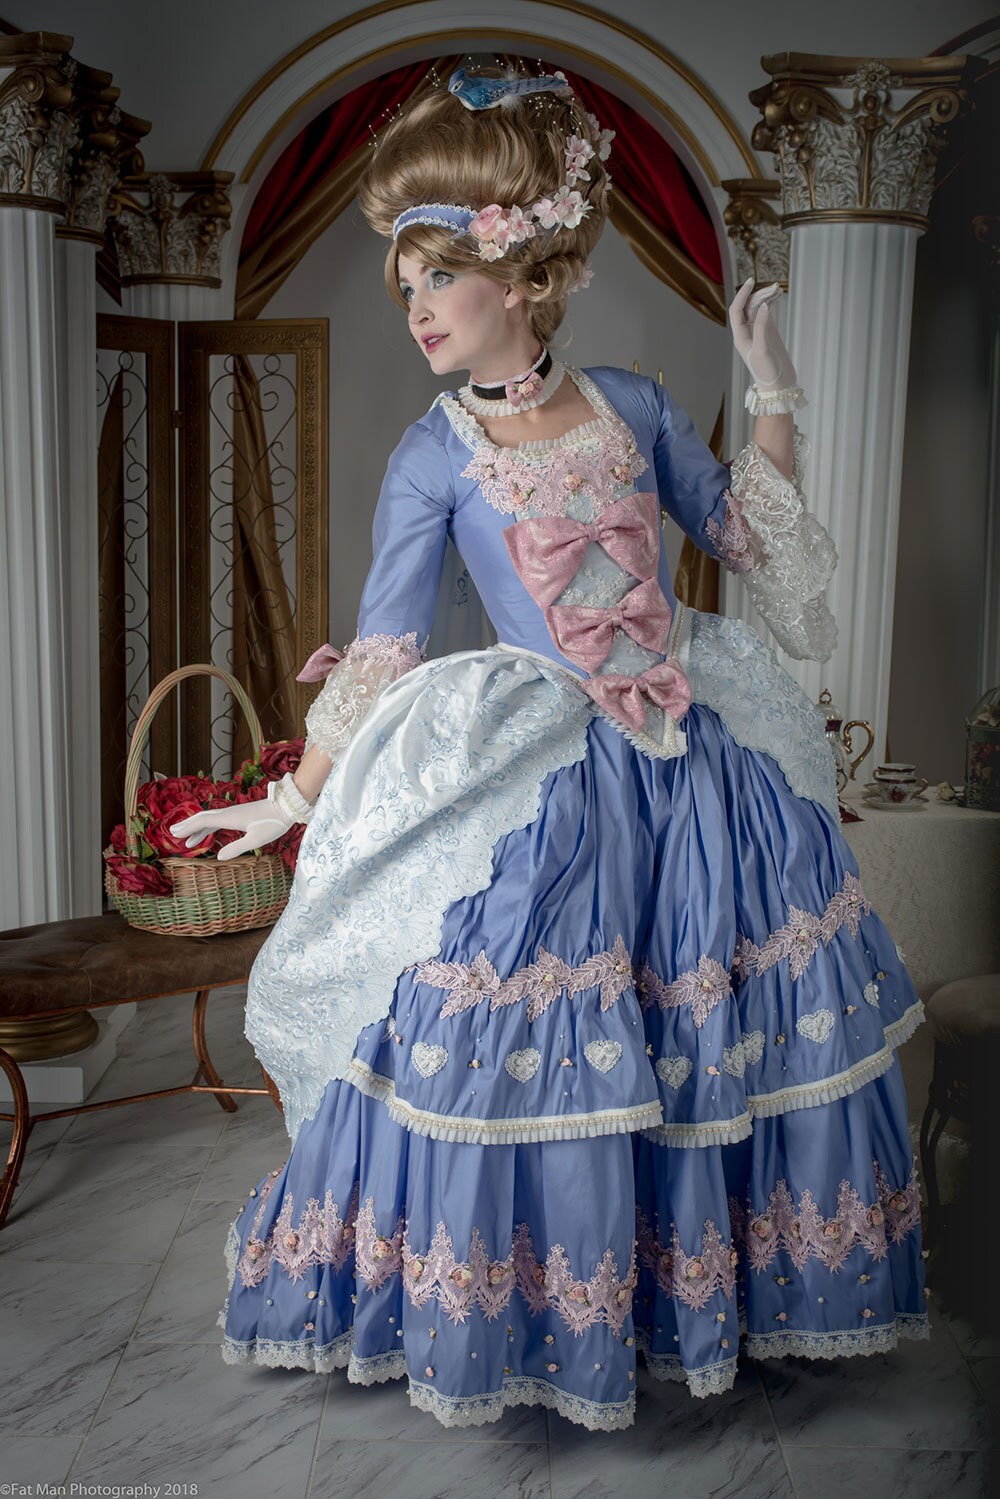 Cassie as Cinderella in Rococo Princess-Inspired Photoshoot